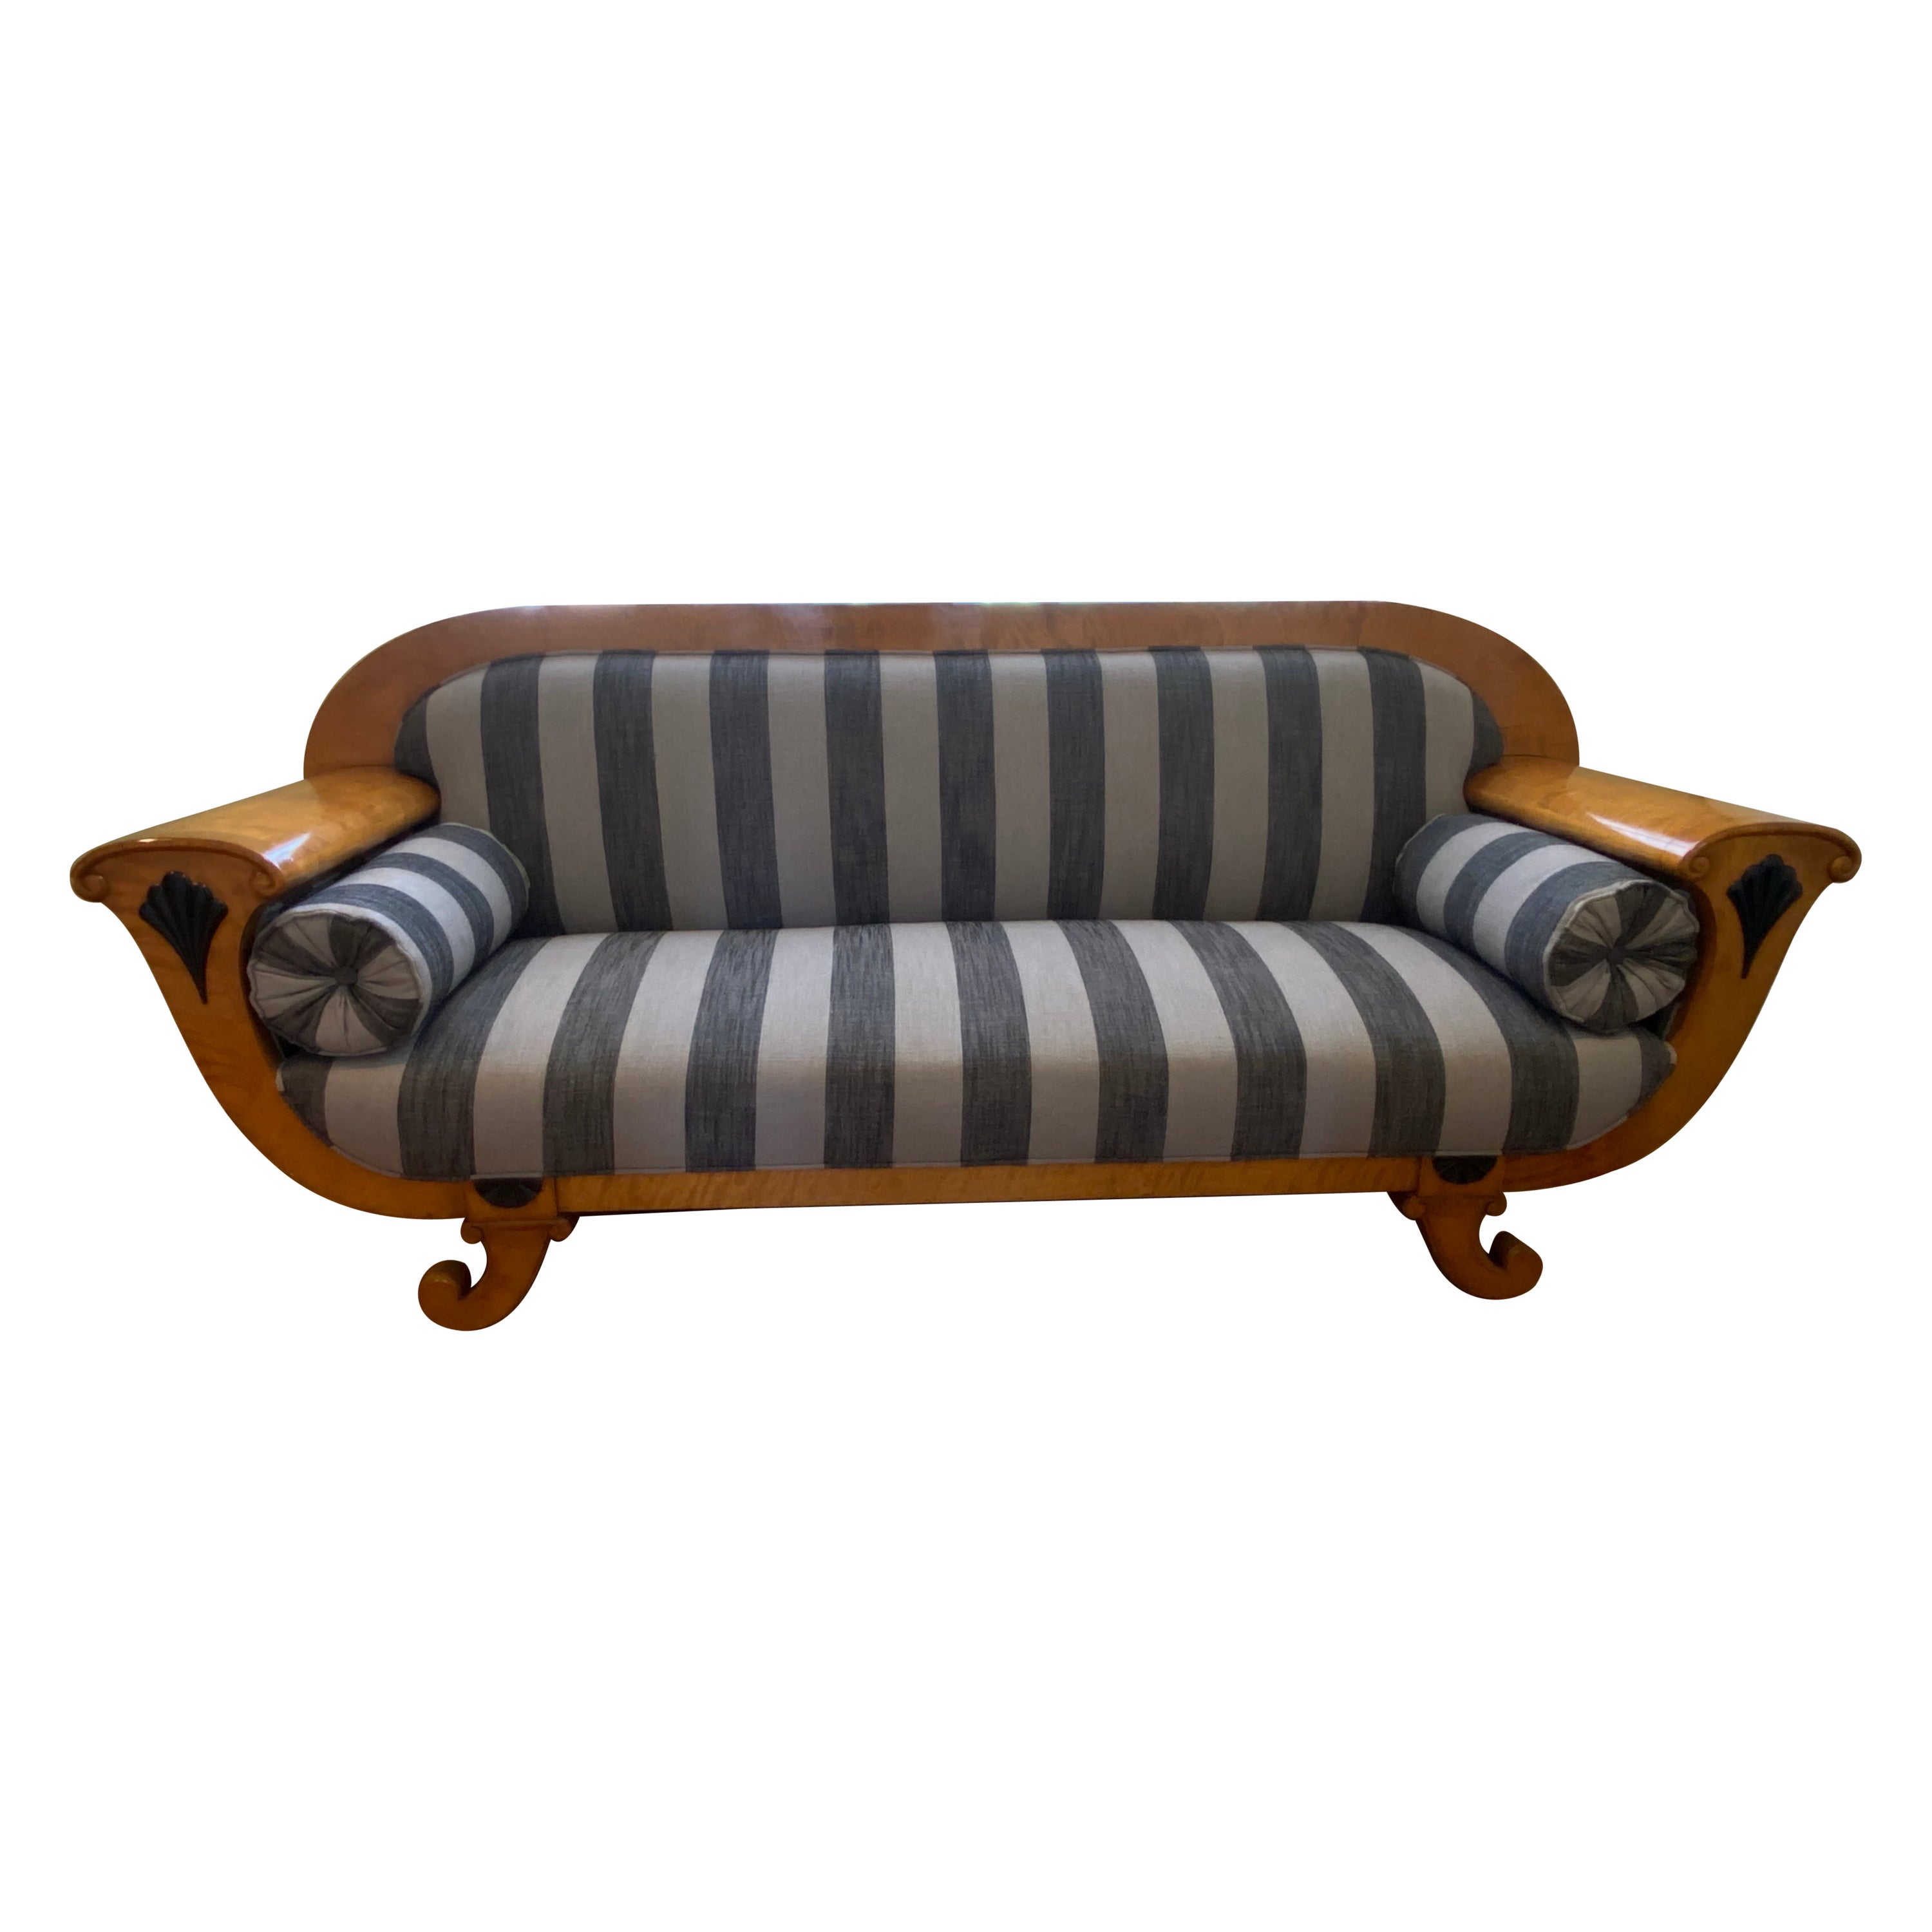 Northern Europe Biedermeier Birch Sofa with Ebonzied Wood details, Early 1900s For Sale